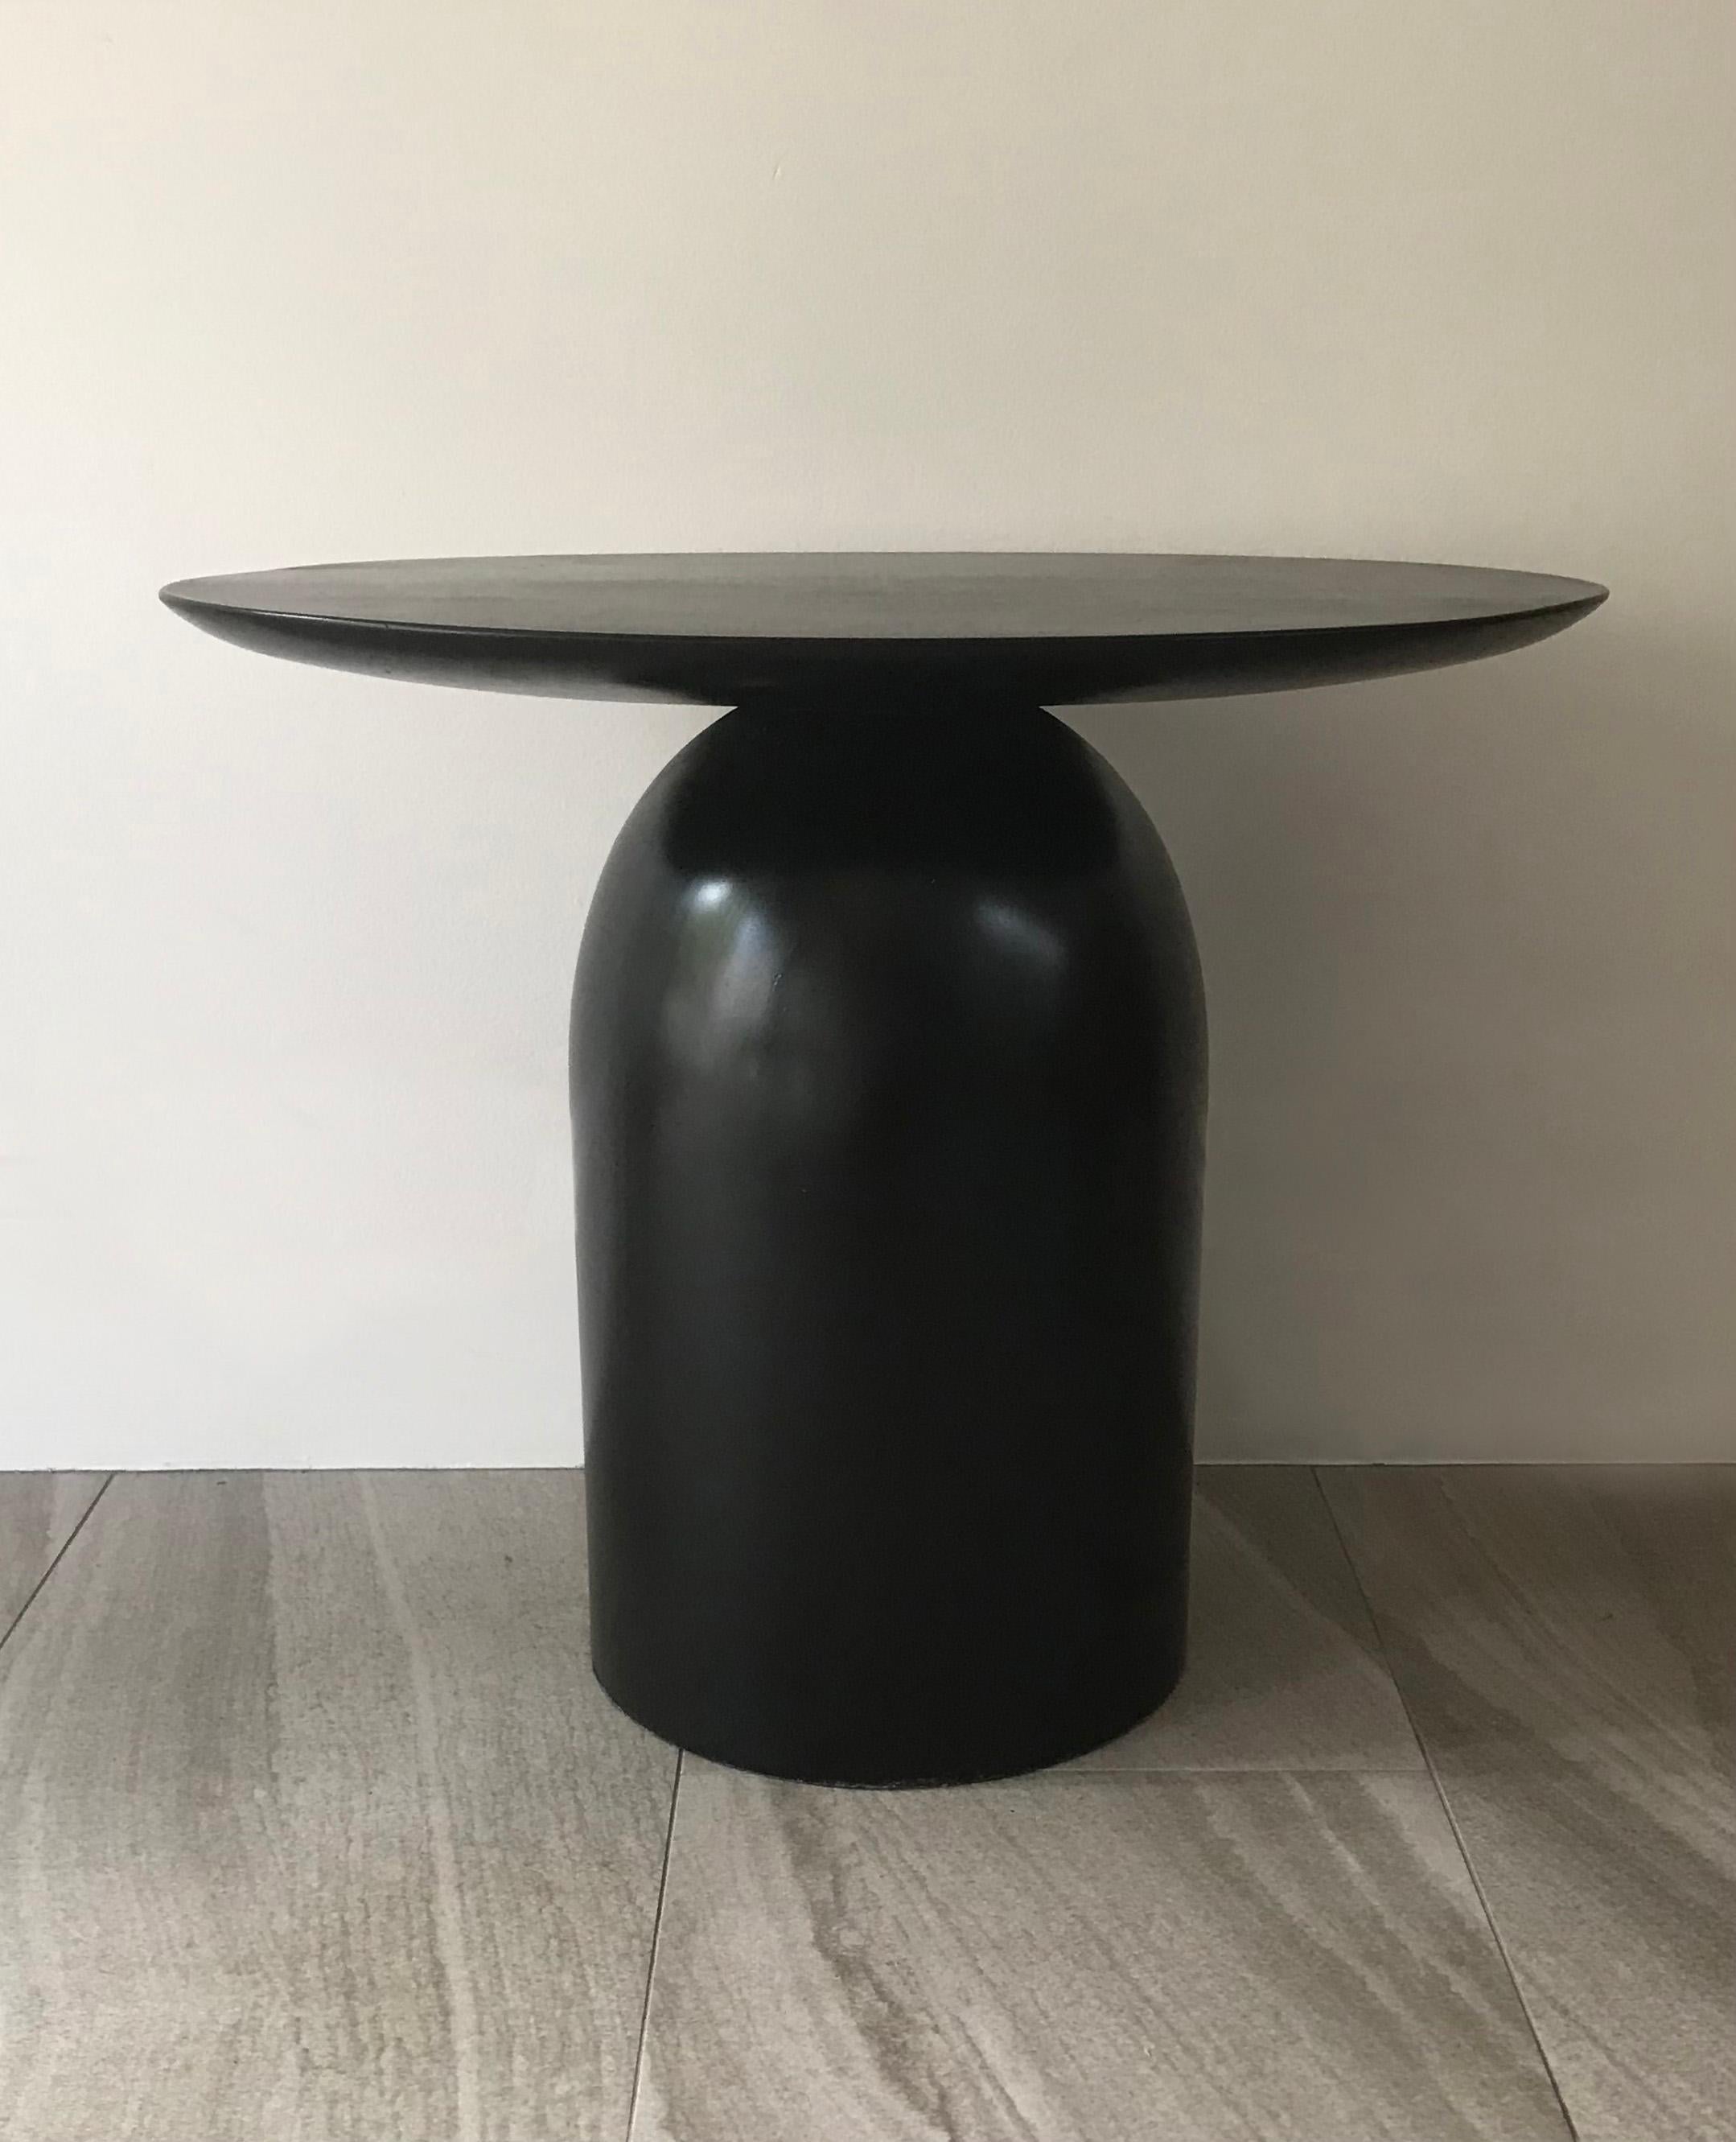 Our EGG Noir side table or coffee table is shown in our original egg table size, approximately 20 inches. EGG tables are truly artisanal, made one piece at a time on a single lathe by master craftsmen in Australia.  Our EGG Tables were inspired by